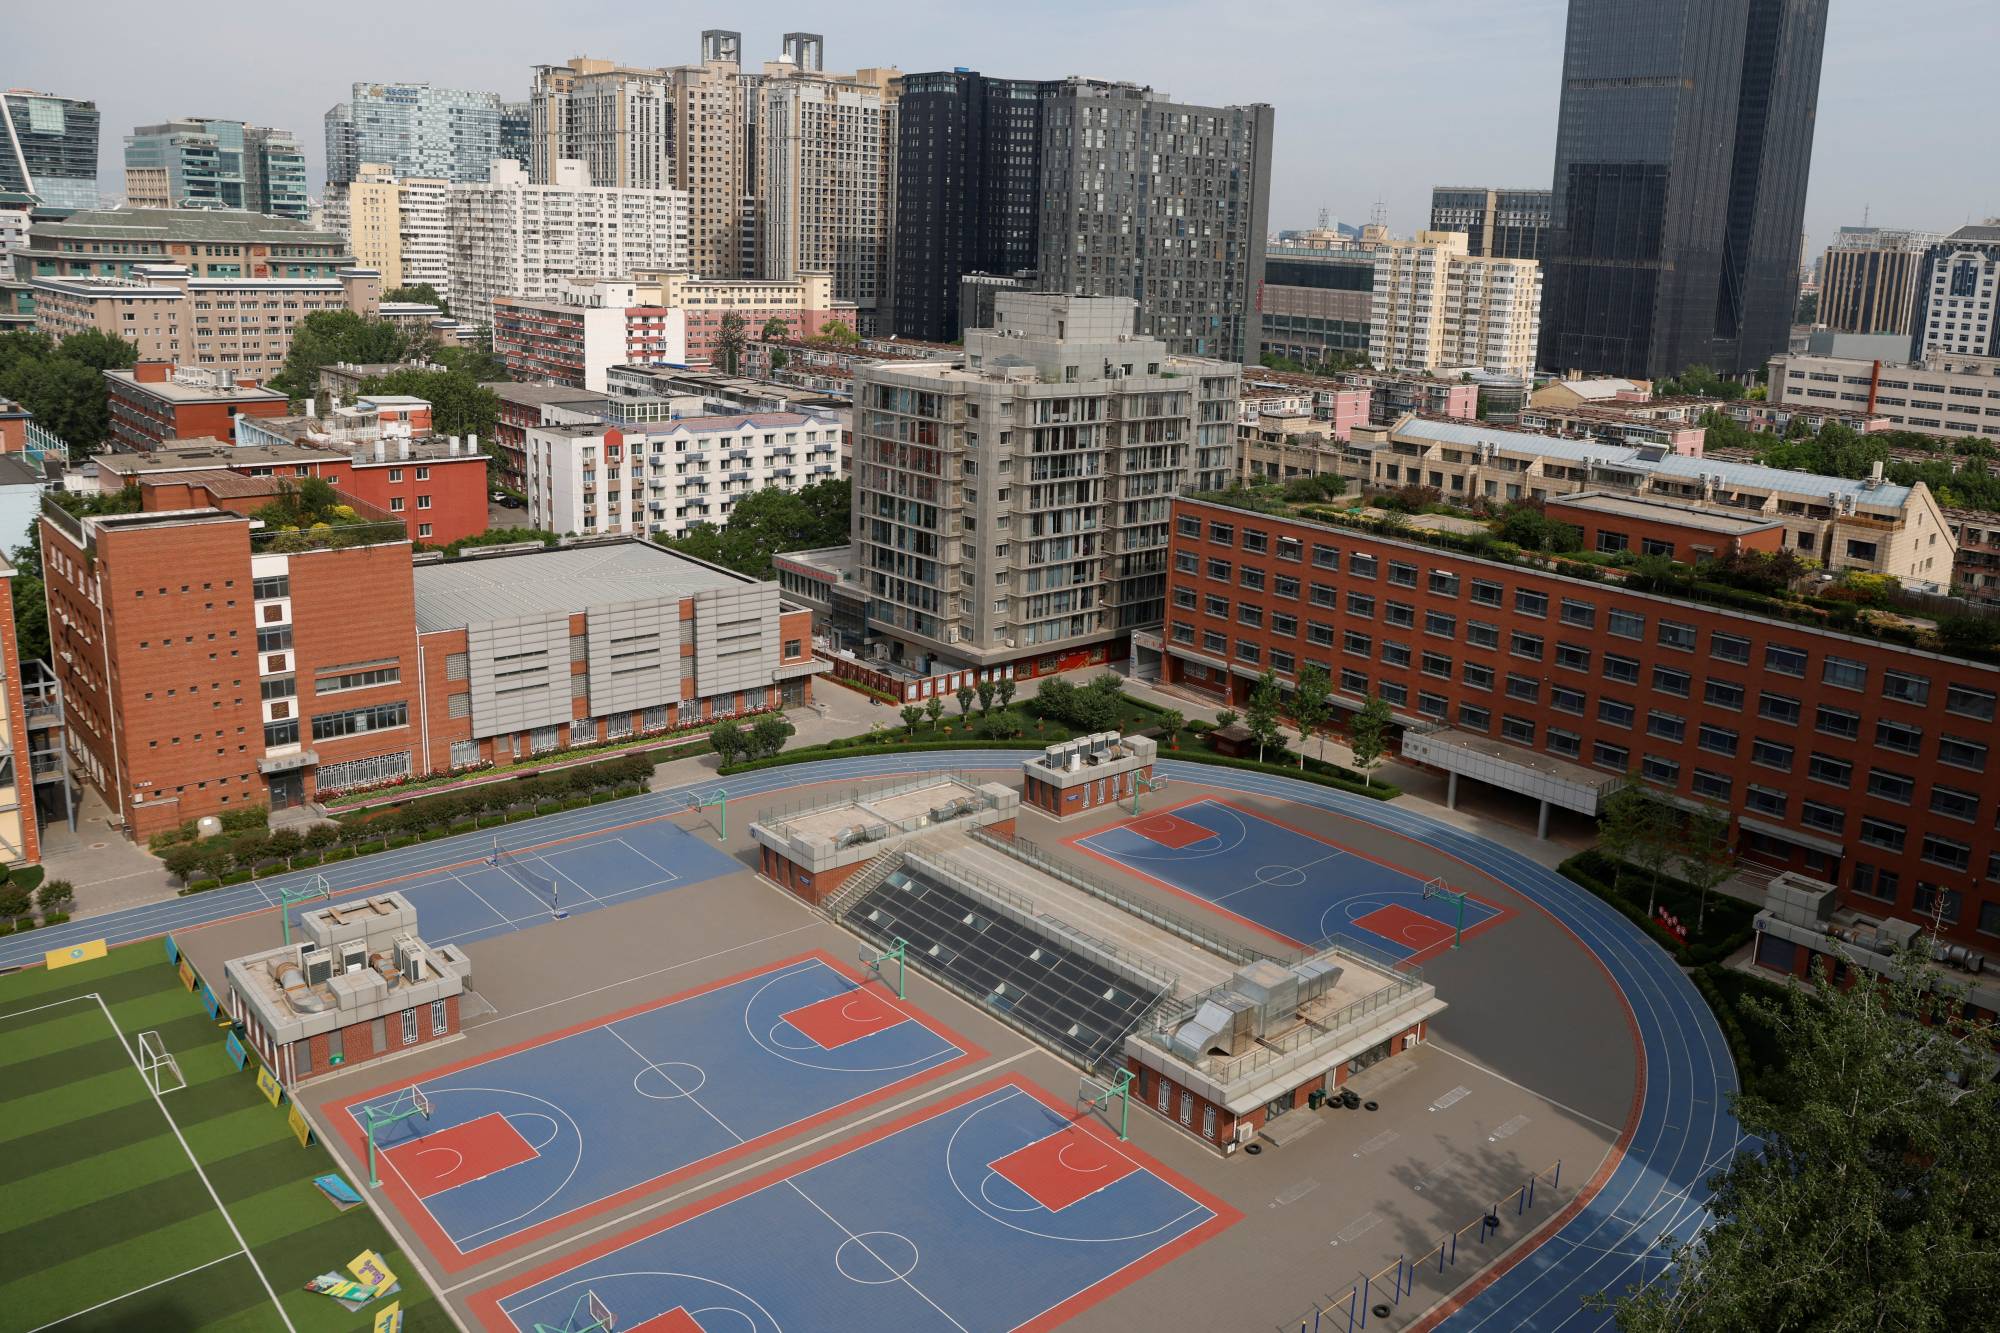 The sports field of a Chinese high school with an international students department in Beijing on Wednesday. In addition to teachers departing, international schools face a drop in foreign student enrollment as the COVID-19 curbs have led many foreign families to leave, while others stay away. | REUTERS